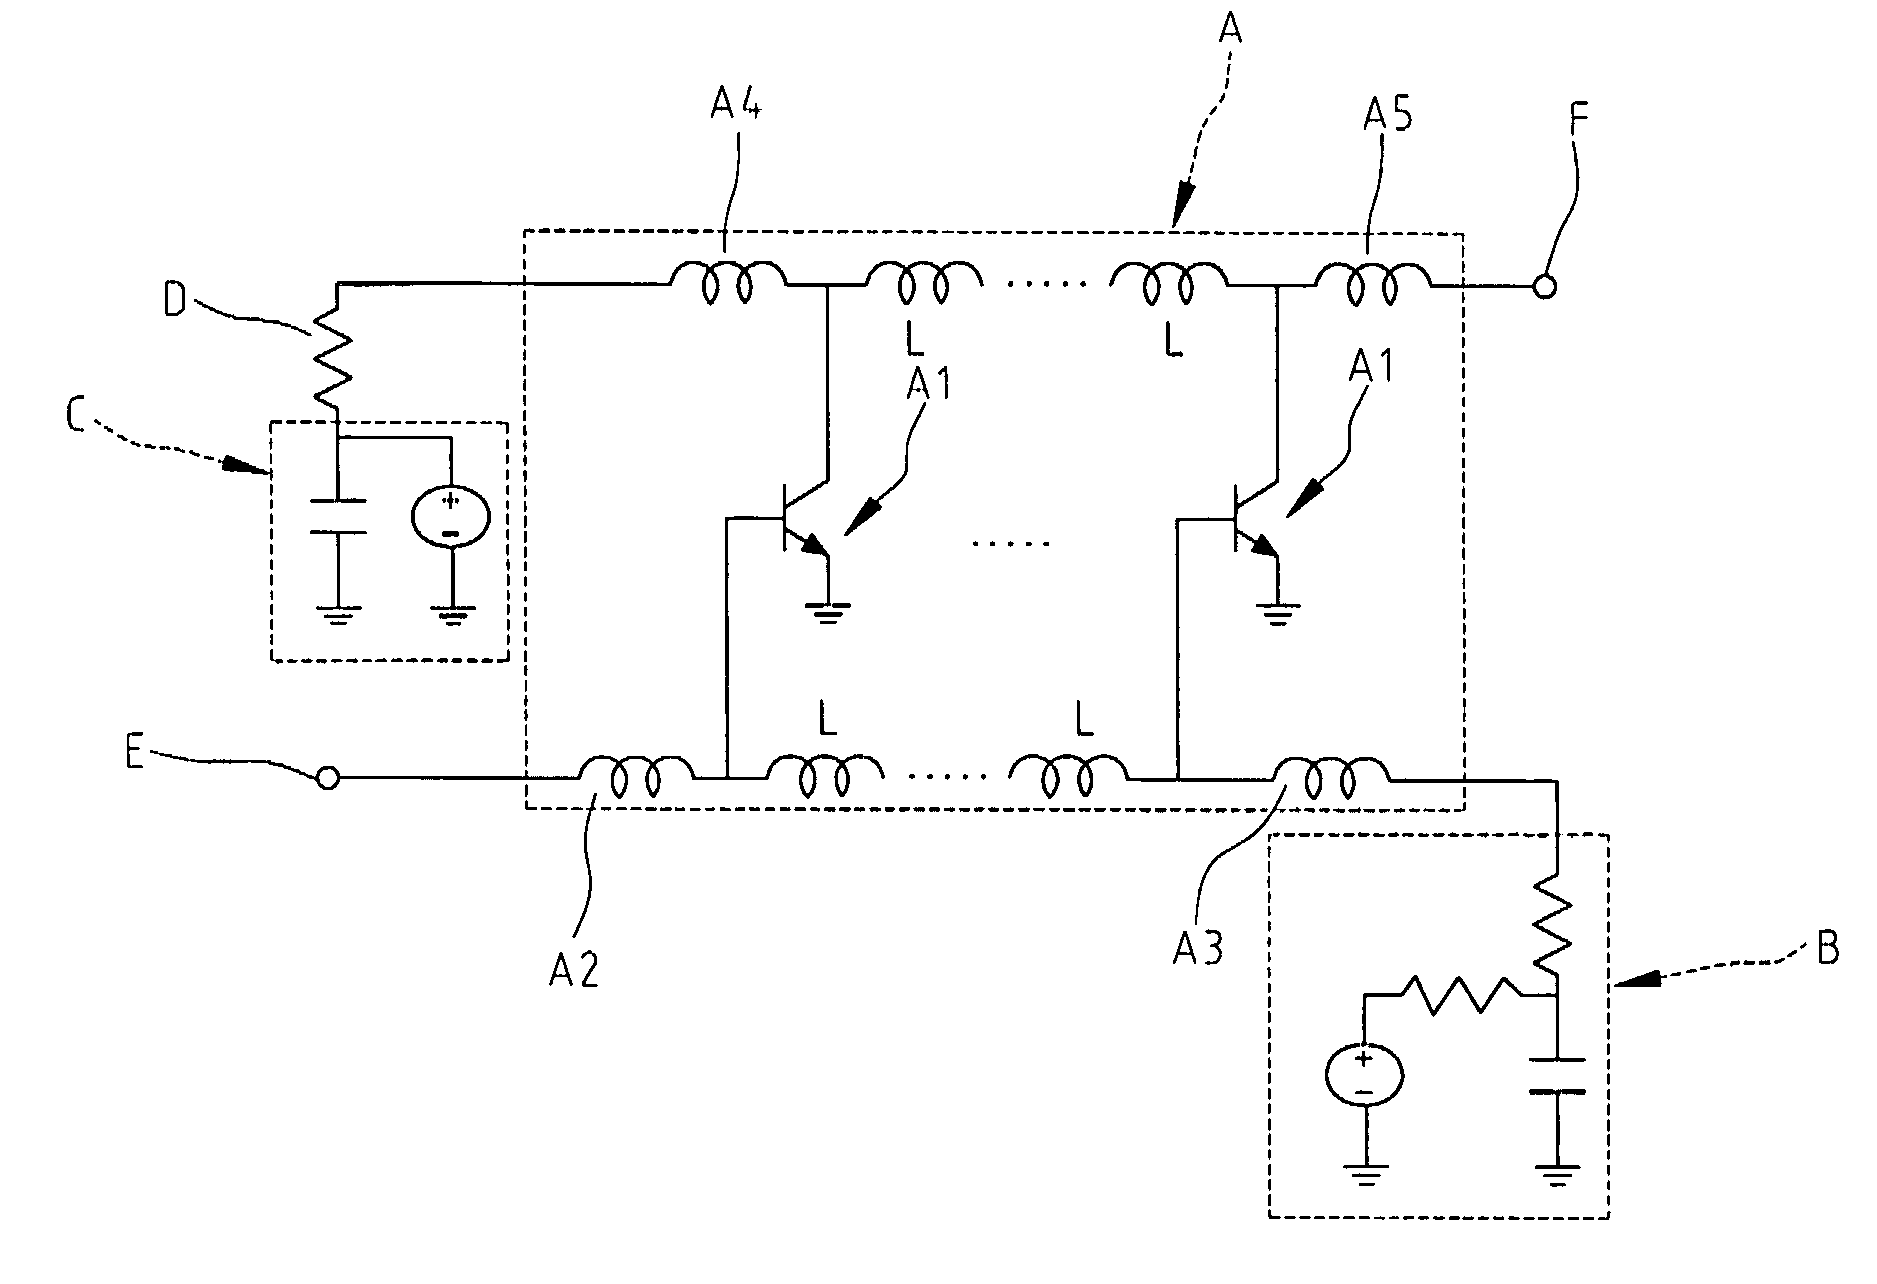 Distributed amplifier having a variable terminal resistance